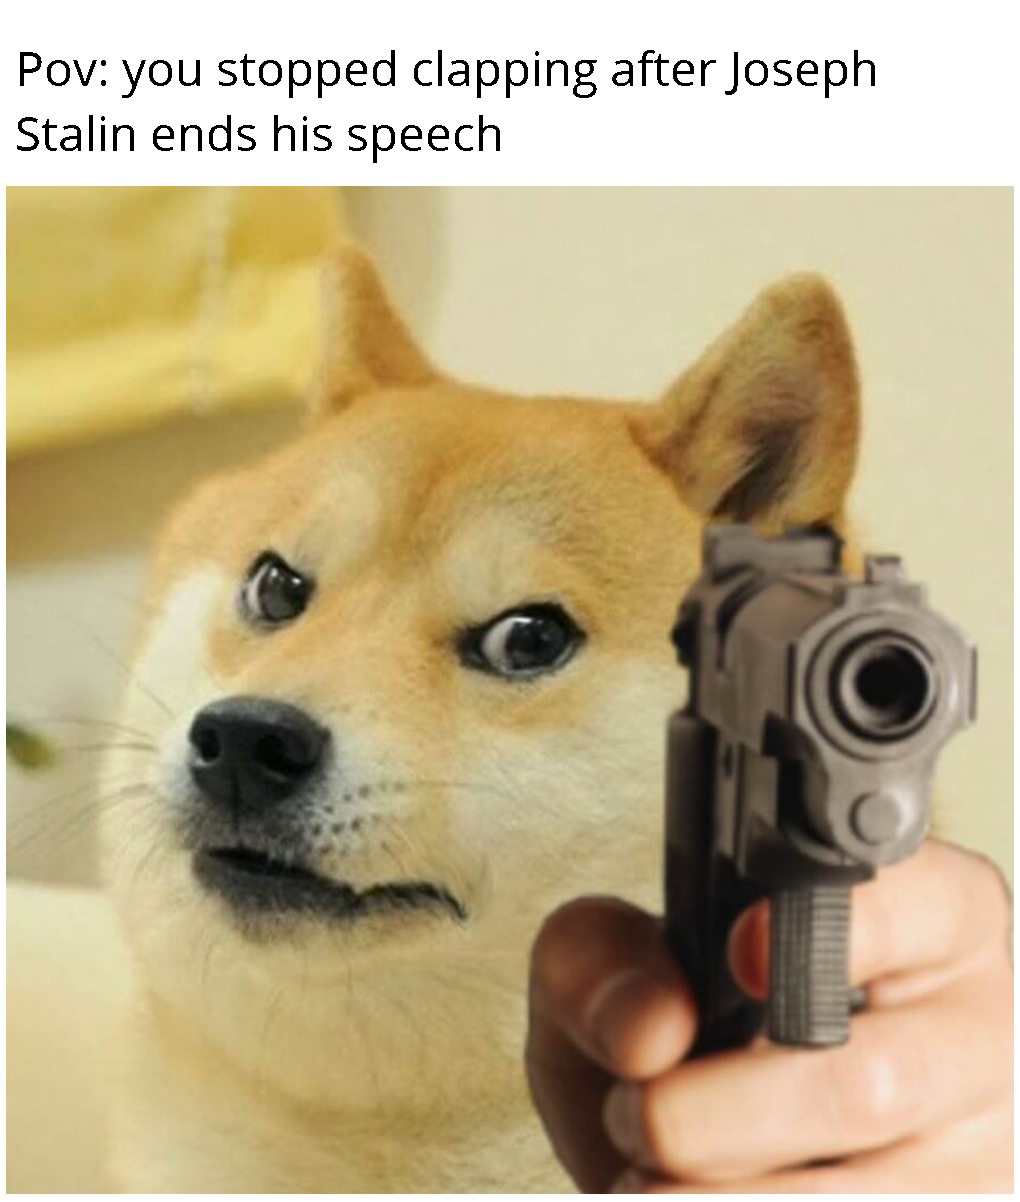 Stalin please don't